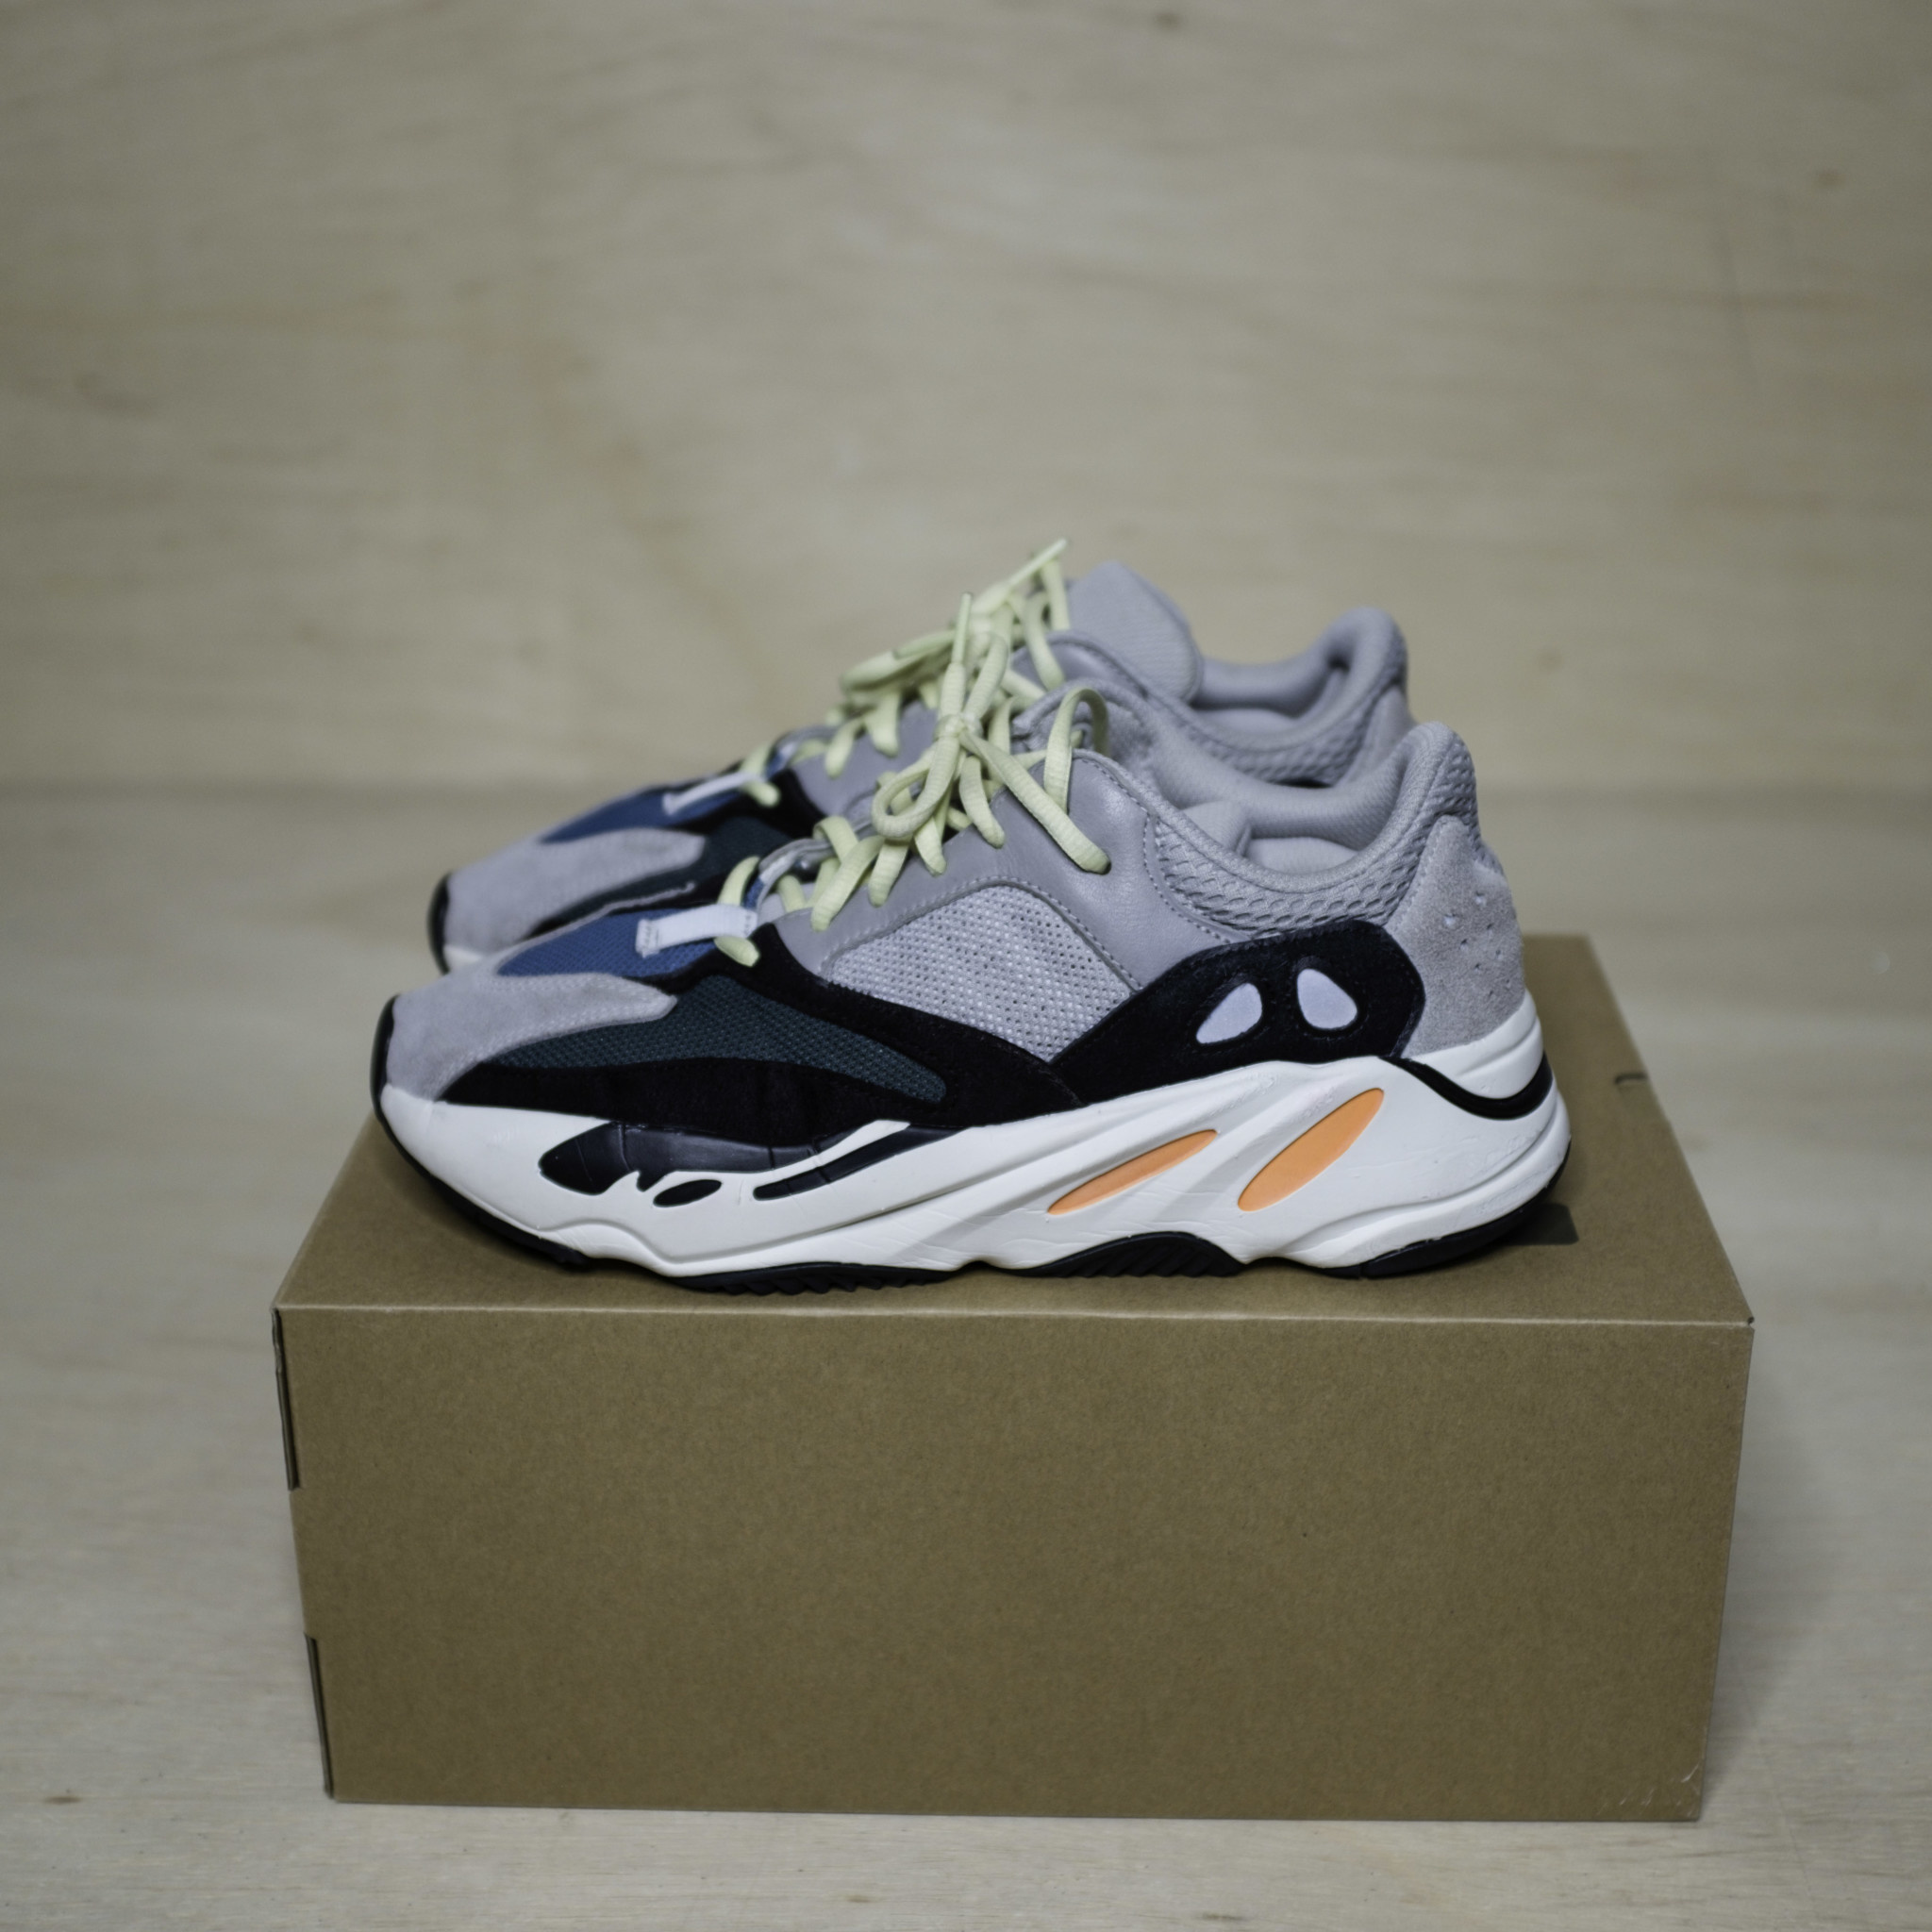 Imposible bordado oasis Adidas adidas Yeezy Boost 700 Wave Runner Size 7.5, DS BRAND NEW -  SoleSeattle